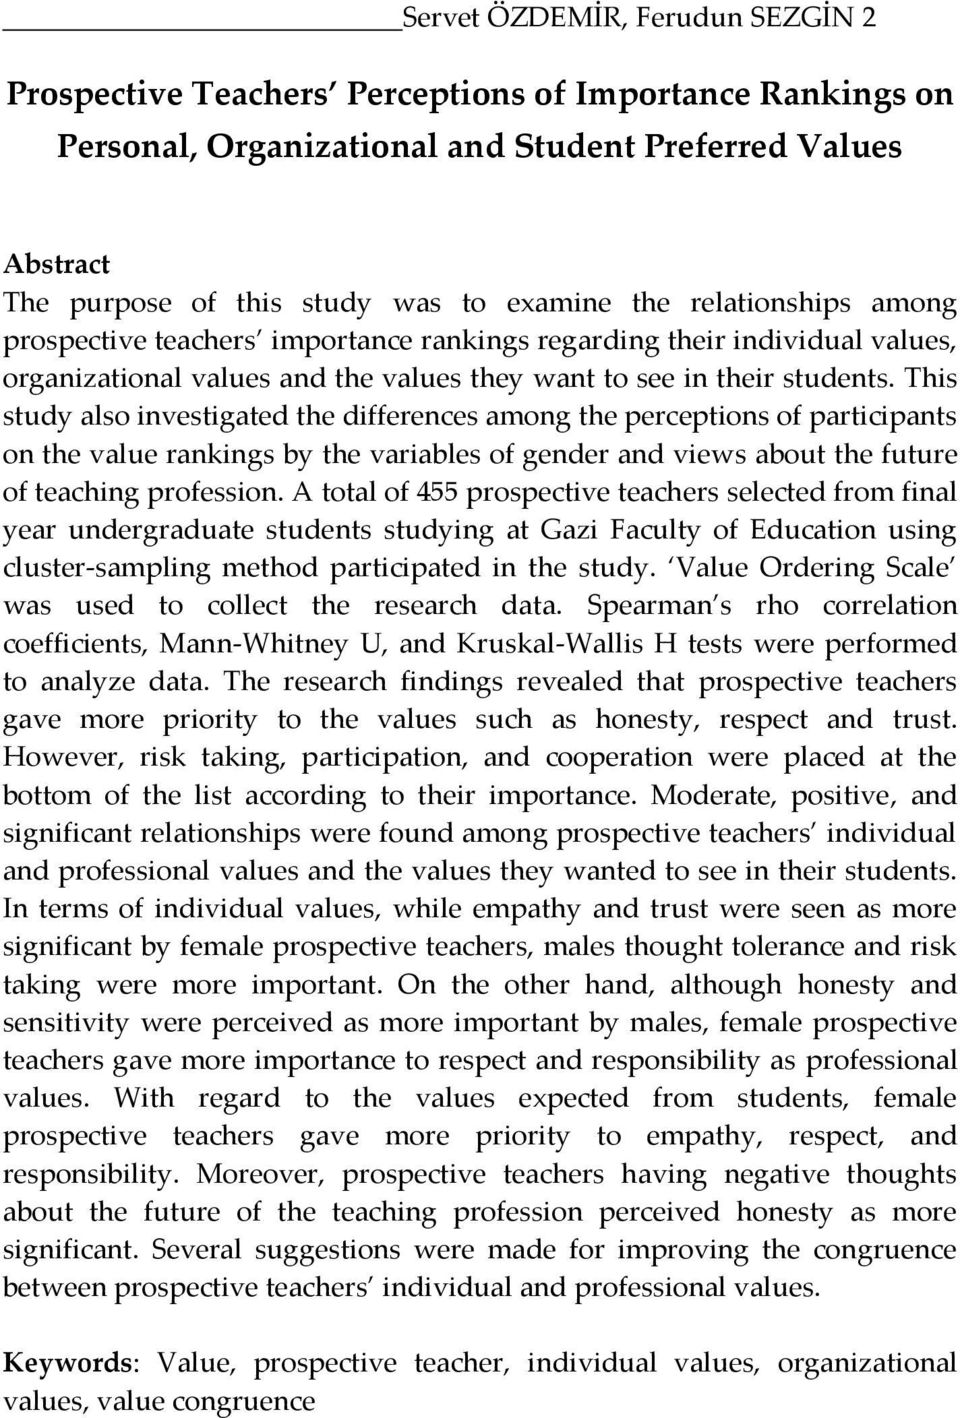 This study also investigated the differences among the perceptions of participants on the value rankings by the variables of gender and views about the future of teaching profession.